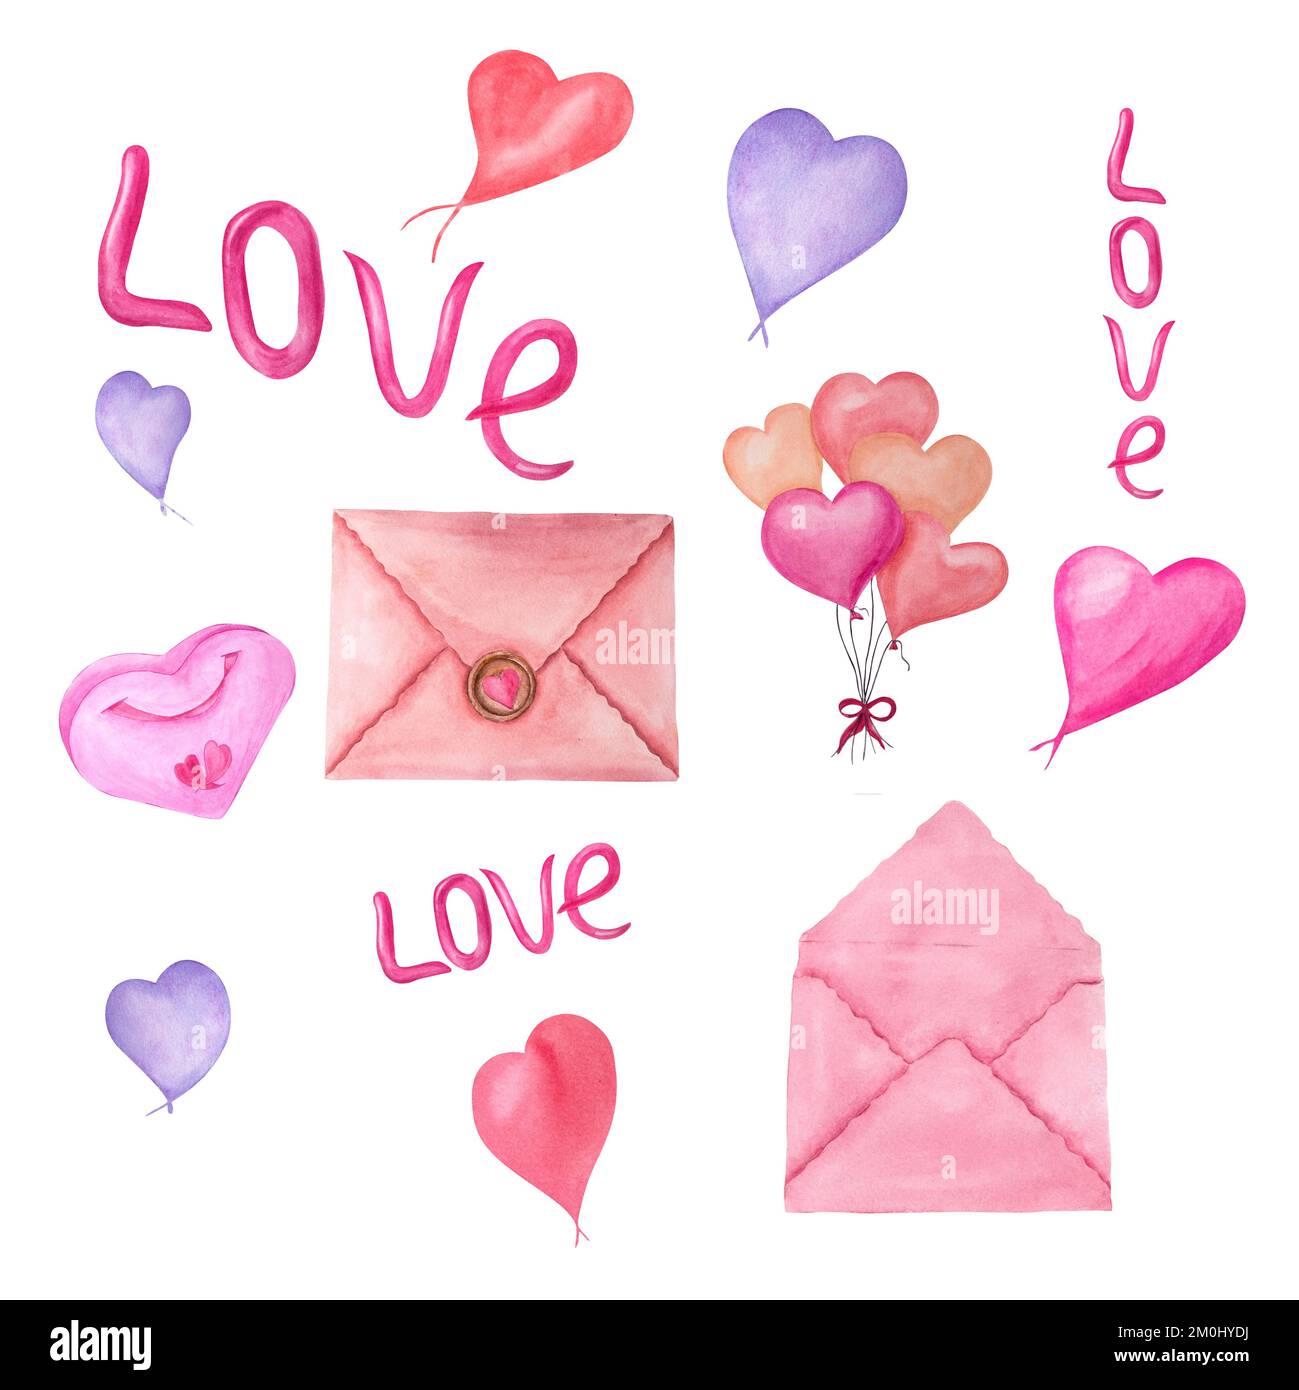 Love letter hand Cut Out Stock Images & Pictures - Alamy